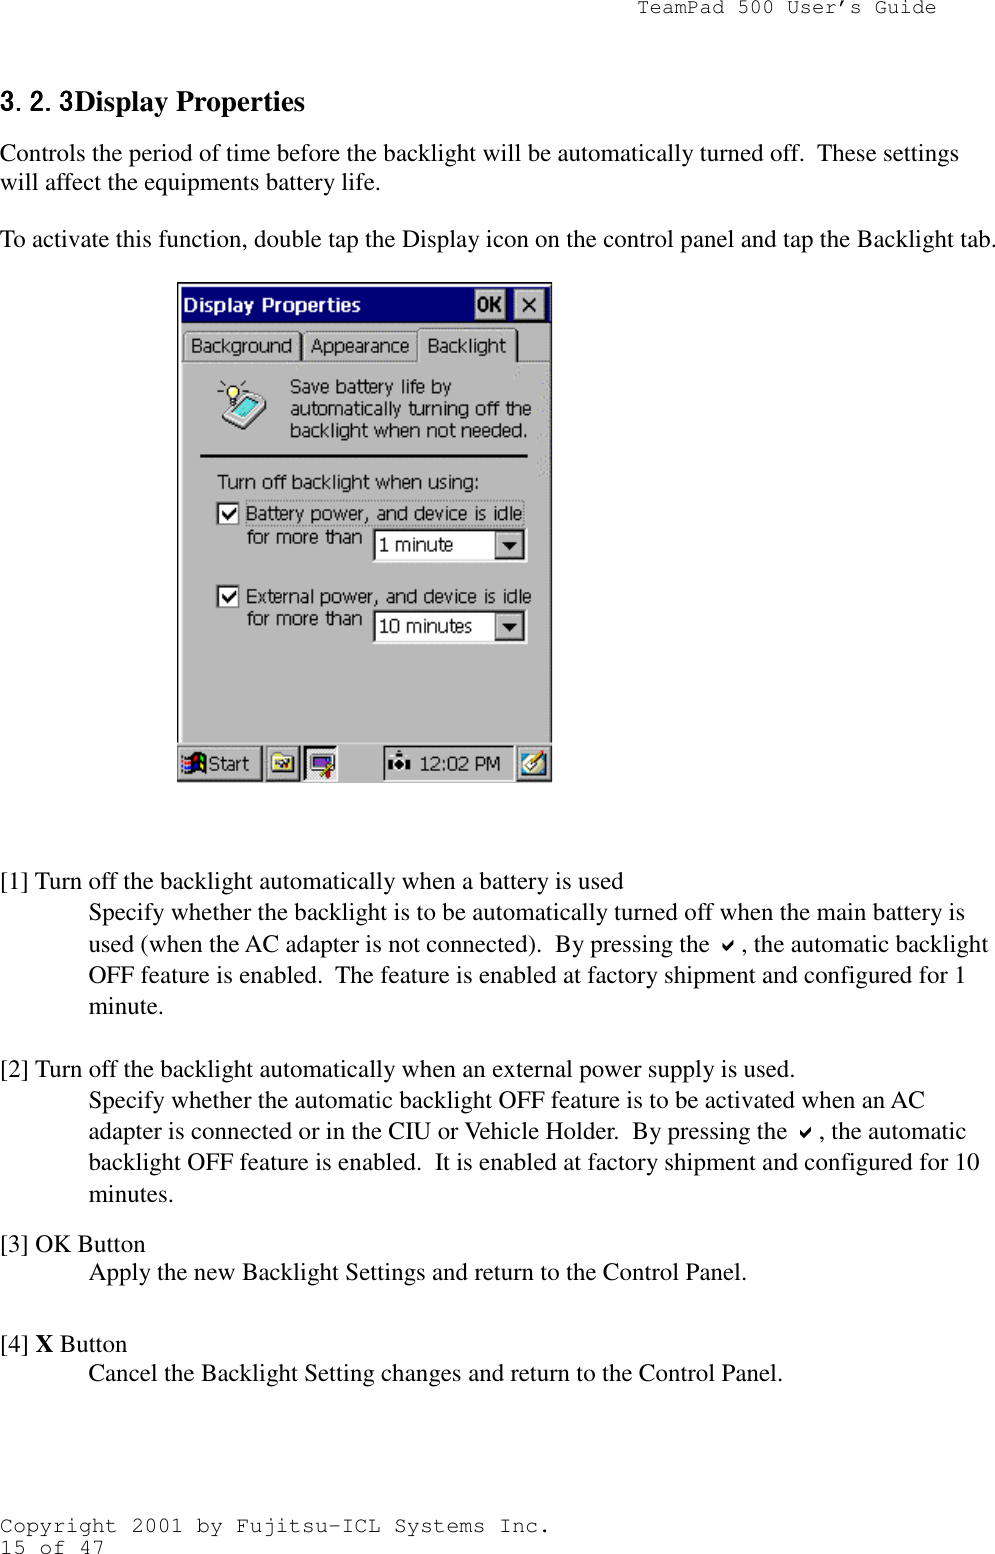                TeamPad 500 User’s GuideCopyright 2001 by Fujitsu-ICL Systems Inc.15 of 473.2.33.2.33.2.33.2.3 Display PropertiesControls the period of time before the backlight will be automatically turned off.  These settingswill affect the equipments battery life.To activate this function, double tap the Display icon on the control panel and tap the Backlight tab.[1] Turn off the backlight automatically when a battery is usedSpecify whether the backlight is to be automatically turned off when the main battery isused (when the AC adapter is not connected).  By pressing the !, the automatic backlightOFF feature is enabled.  The feature is enabled at factory shipment and configured for 1minute.[2] Turn off the backlight automatically when an external power supply is used.Specify whether the automatic backlight OFF feature is to be activated when an ACadapter is connected or in the CIU or Vehicle Holder.  By pressing the !, the automaticbacklight OFF feature is enabled.  It is enabled at factory shipment and configured for 10minutes.[3] OK ButtonApply the new Backlight Settings and return to the Control Panel.[4] X ButtonCancel the Backlight Setting changes and return to the Control Panel.